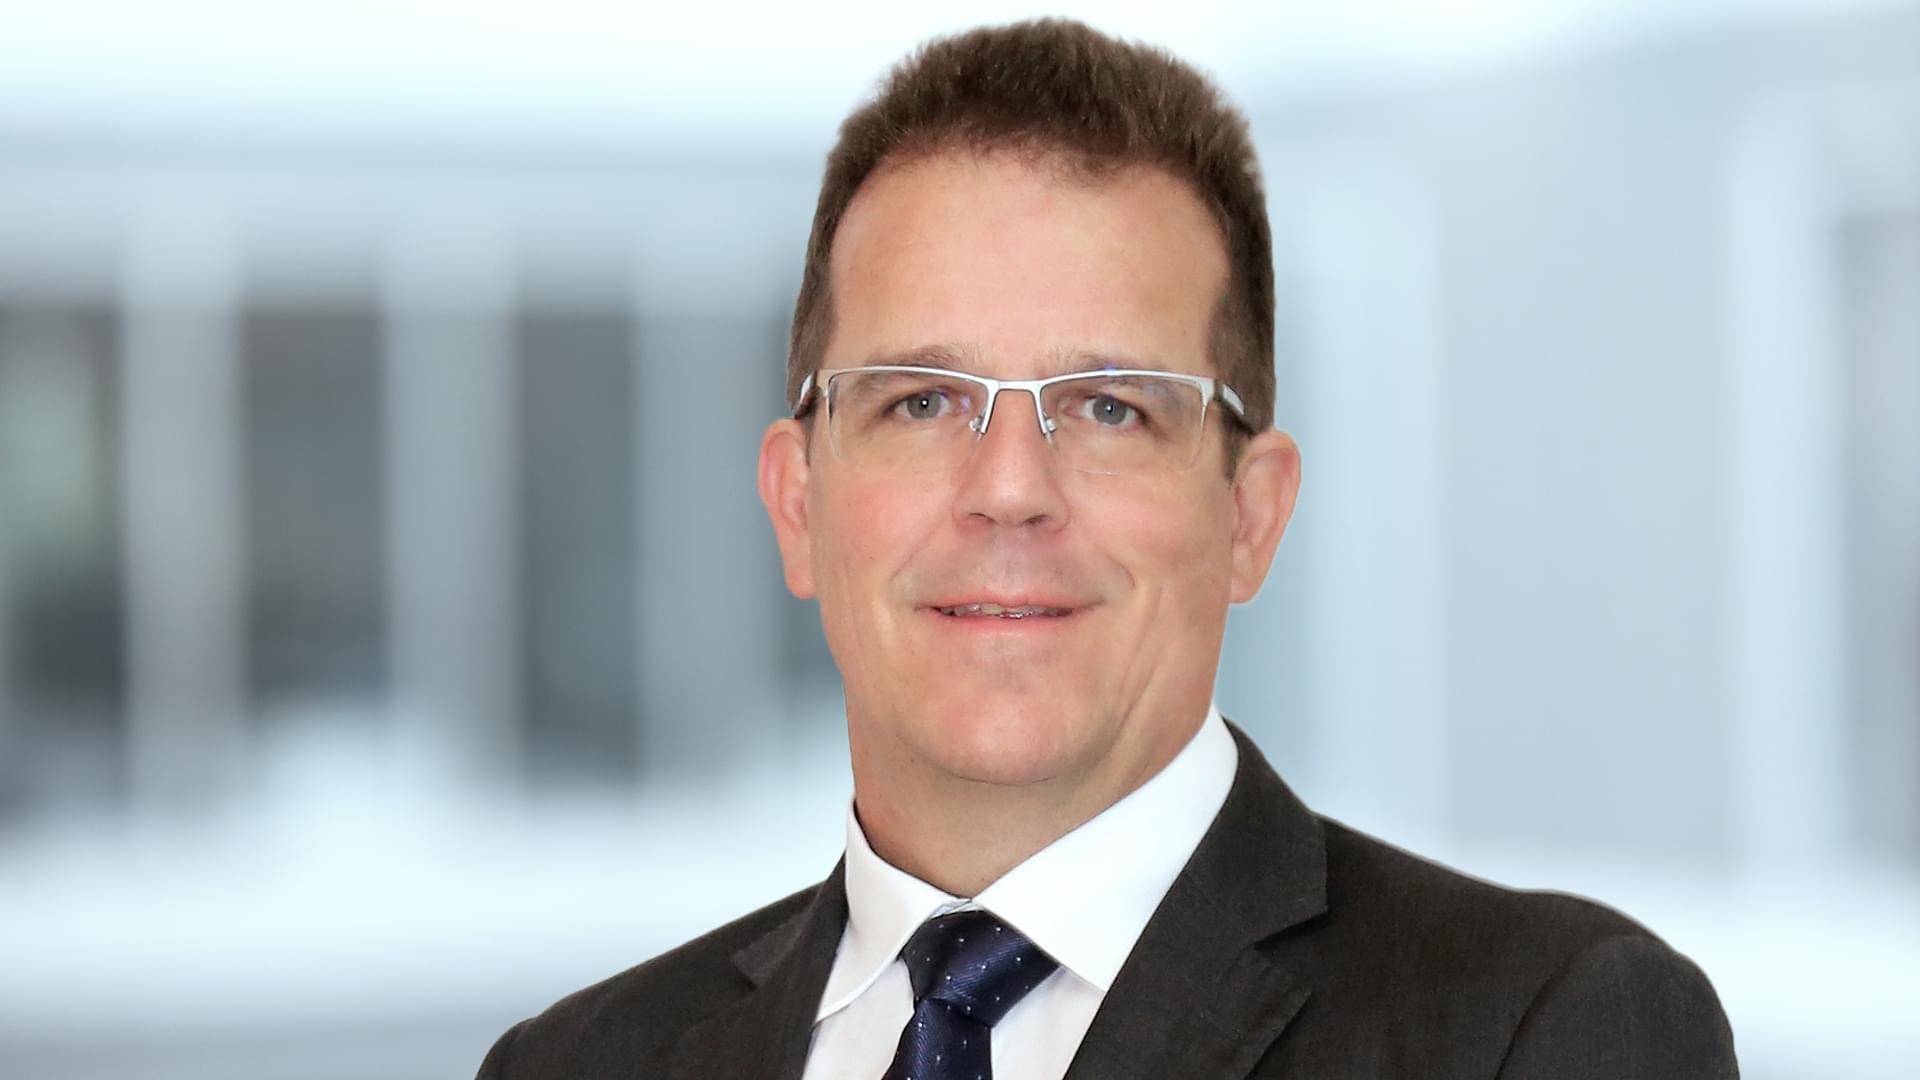 Andreas Weidenschlager: General Manager Knorr-Bremse Pamplona Spain